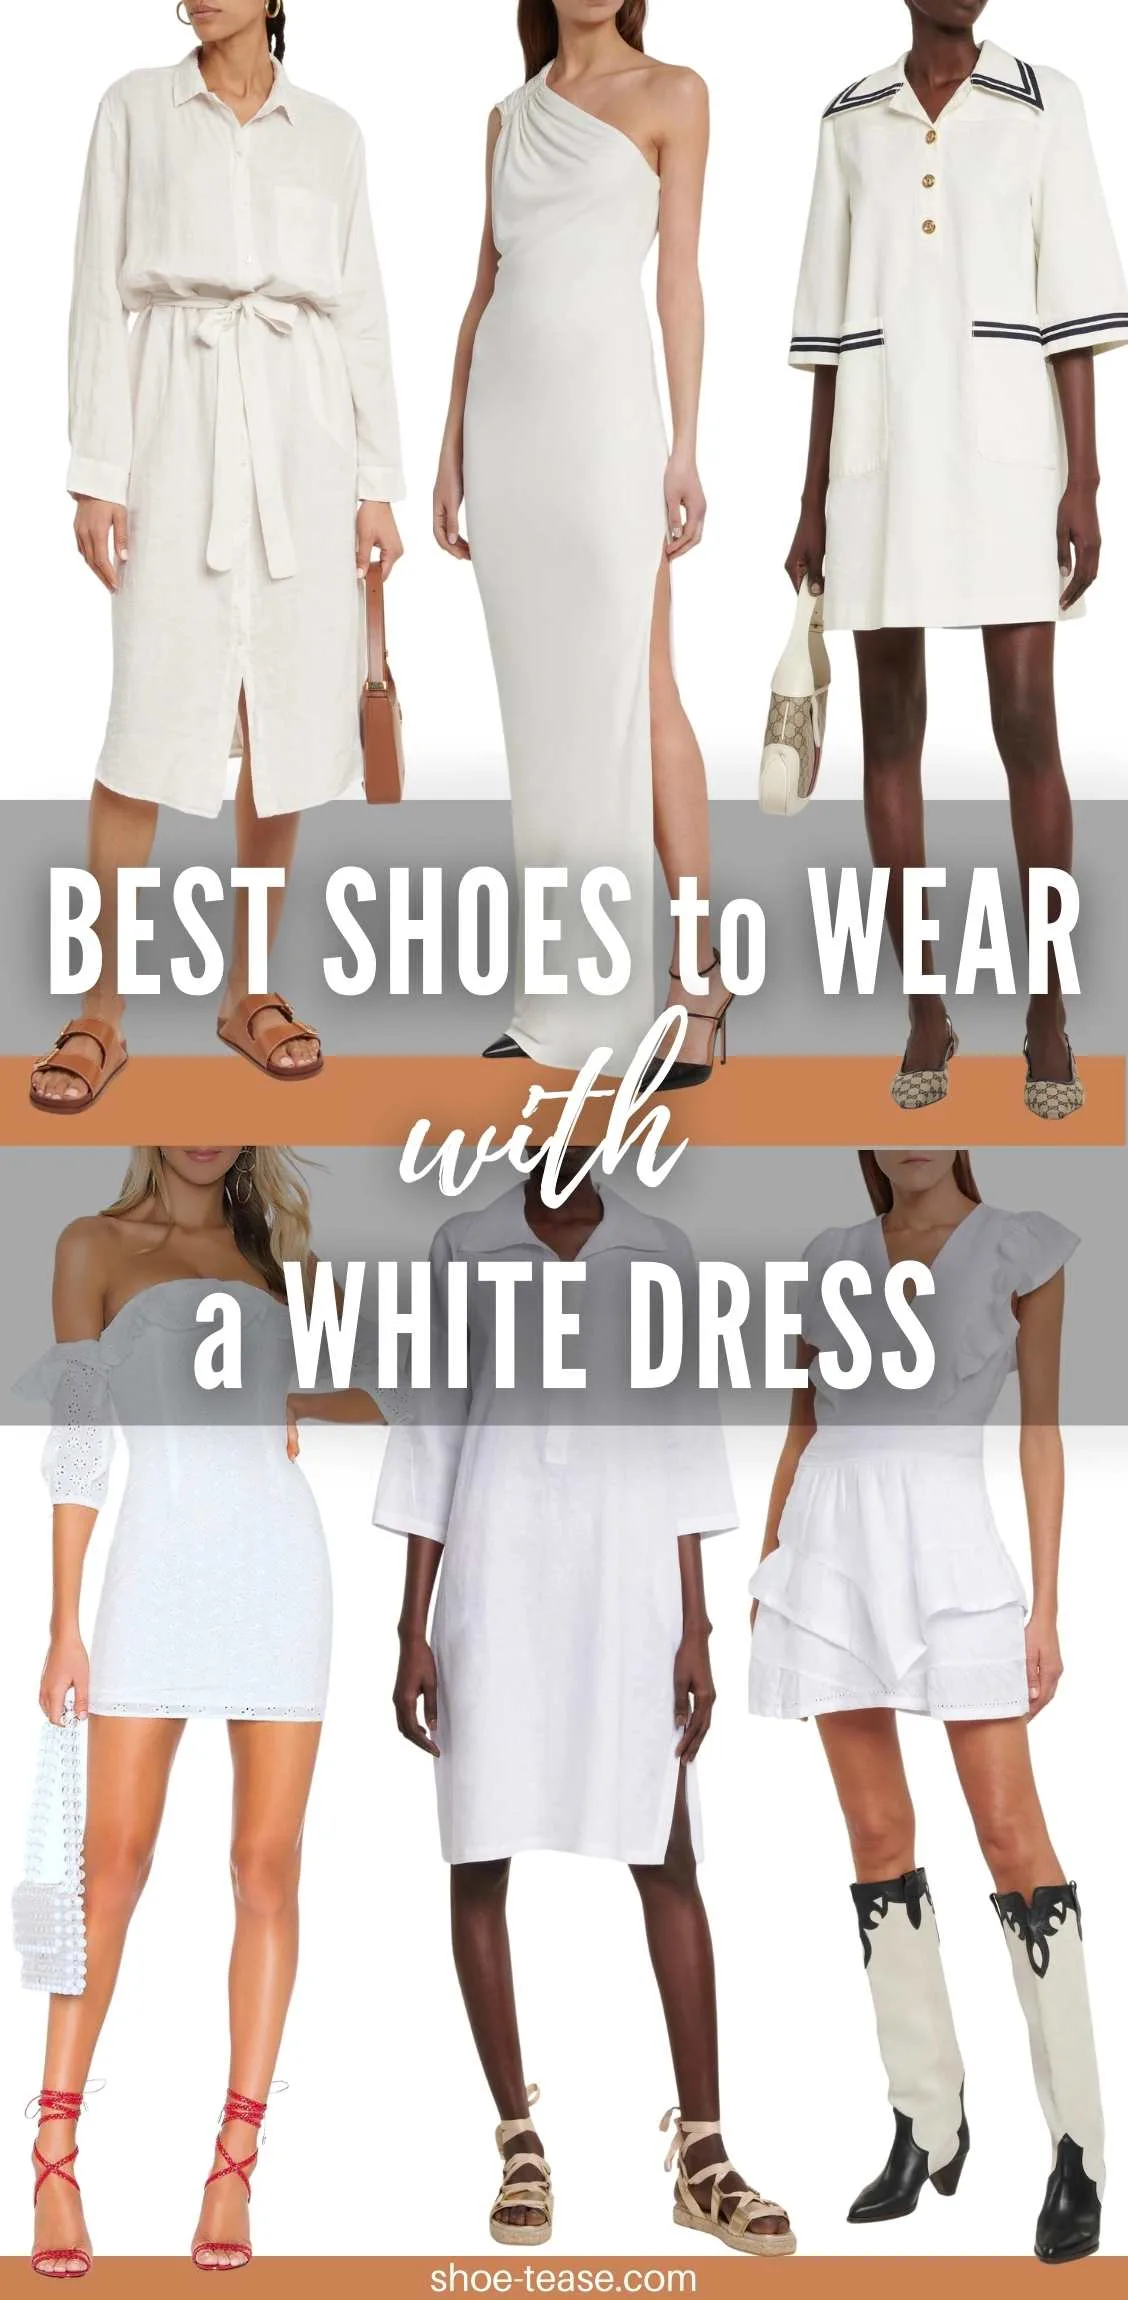 What Shoes To Combine With A White Mini Dress For A Cocktail?